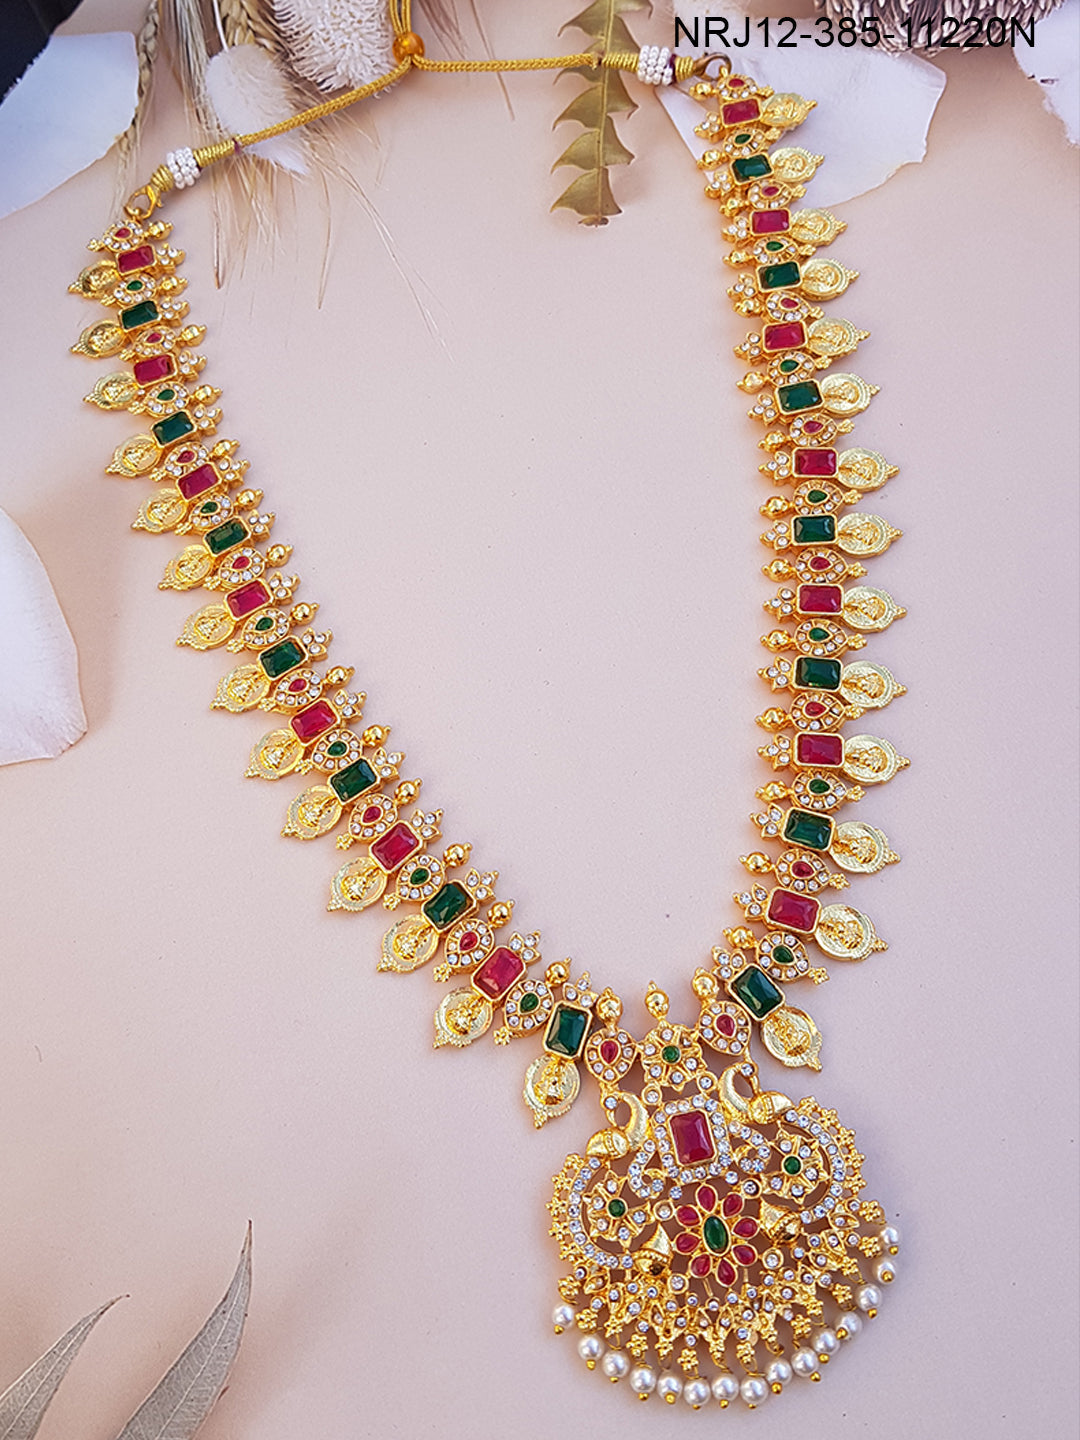 Premium Gold Plated Long Necklace with Multi colour CZ Stones 11220N